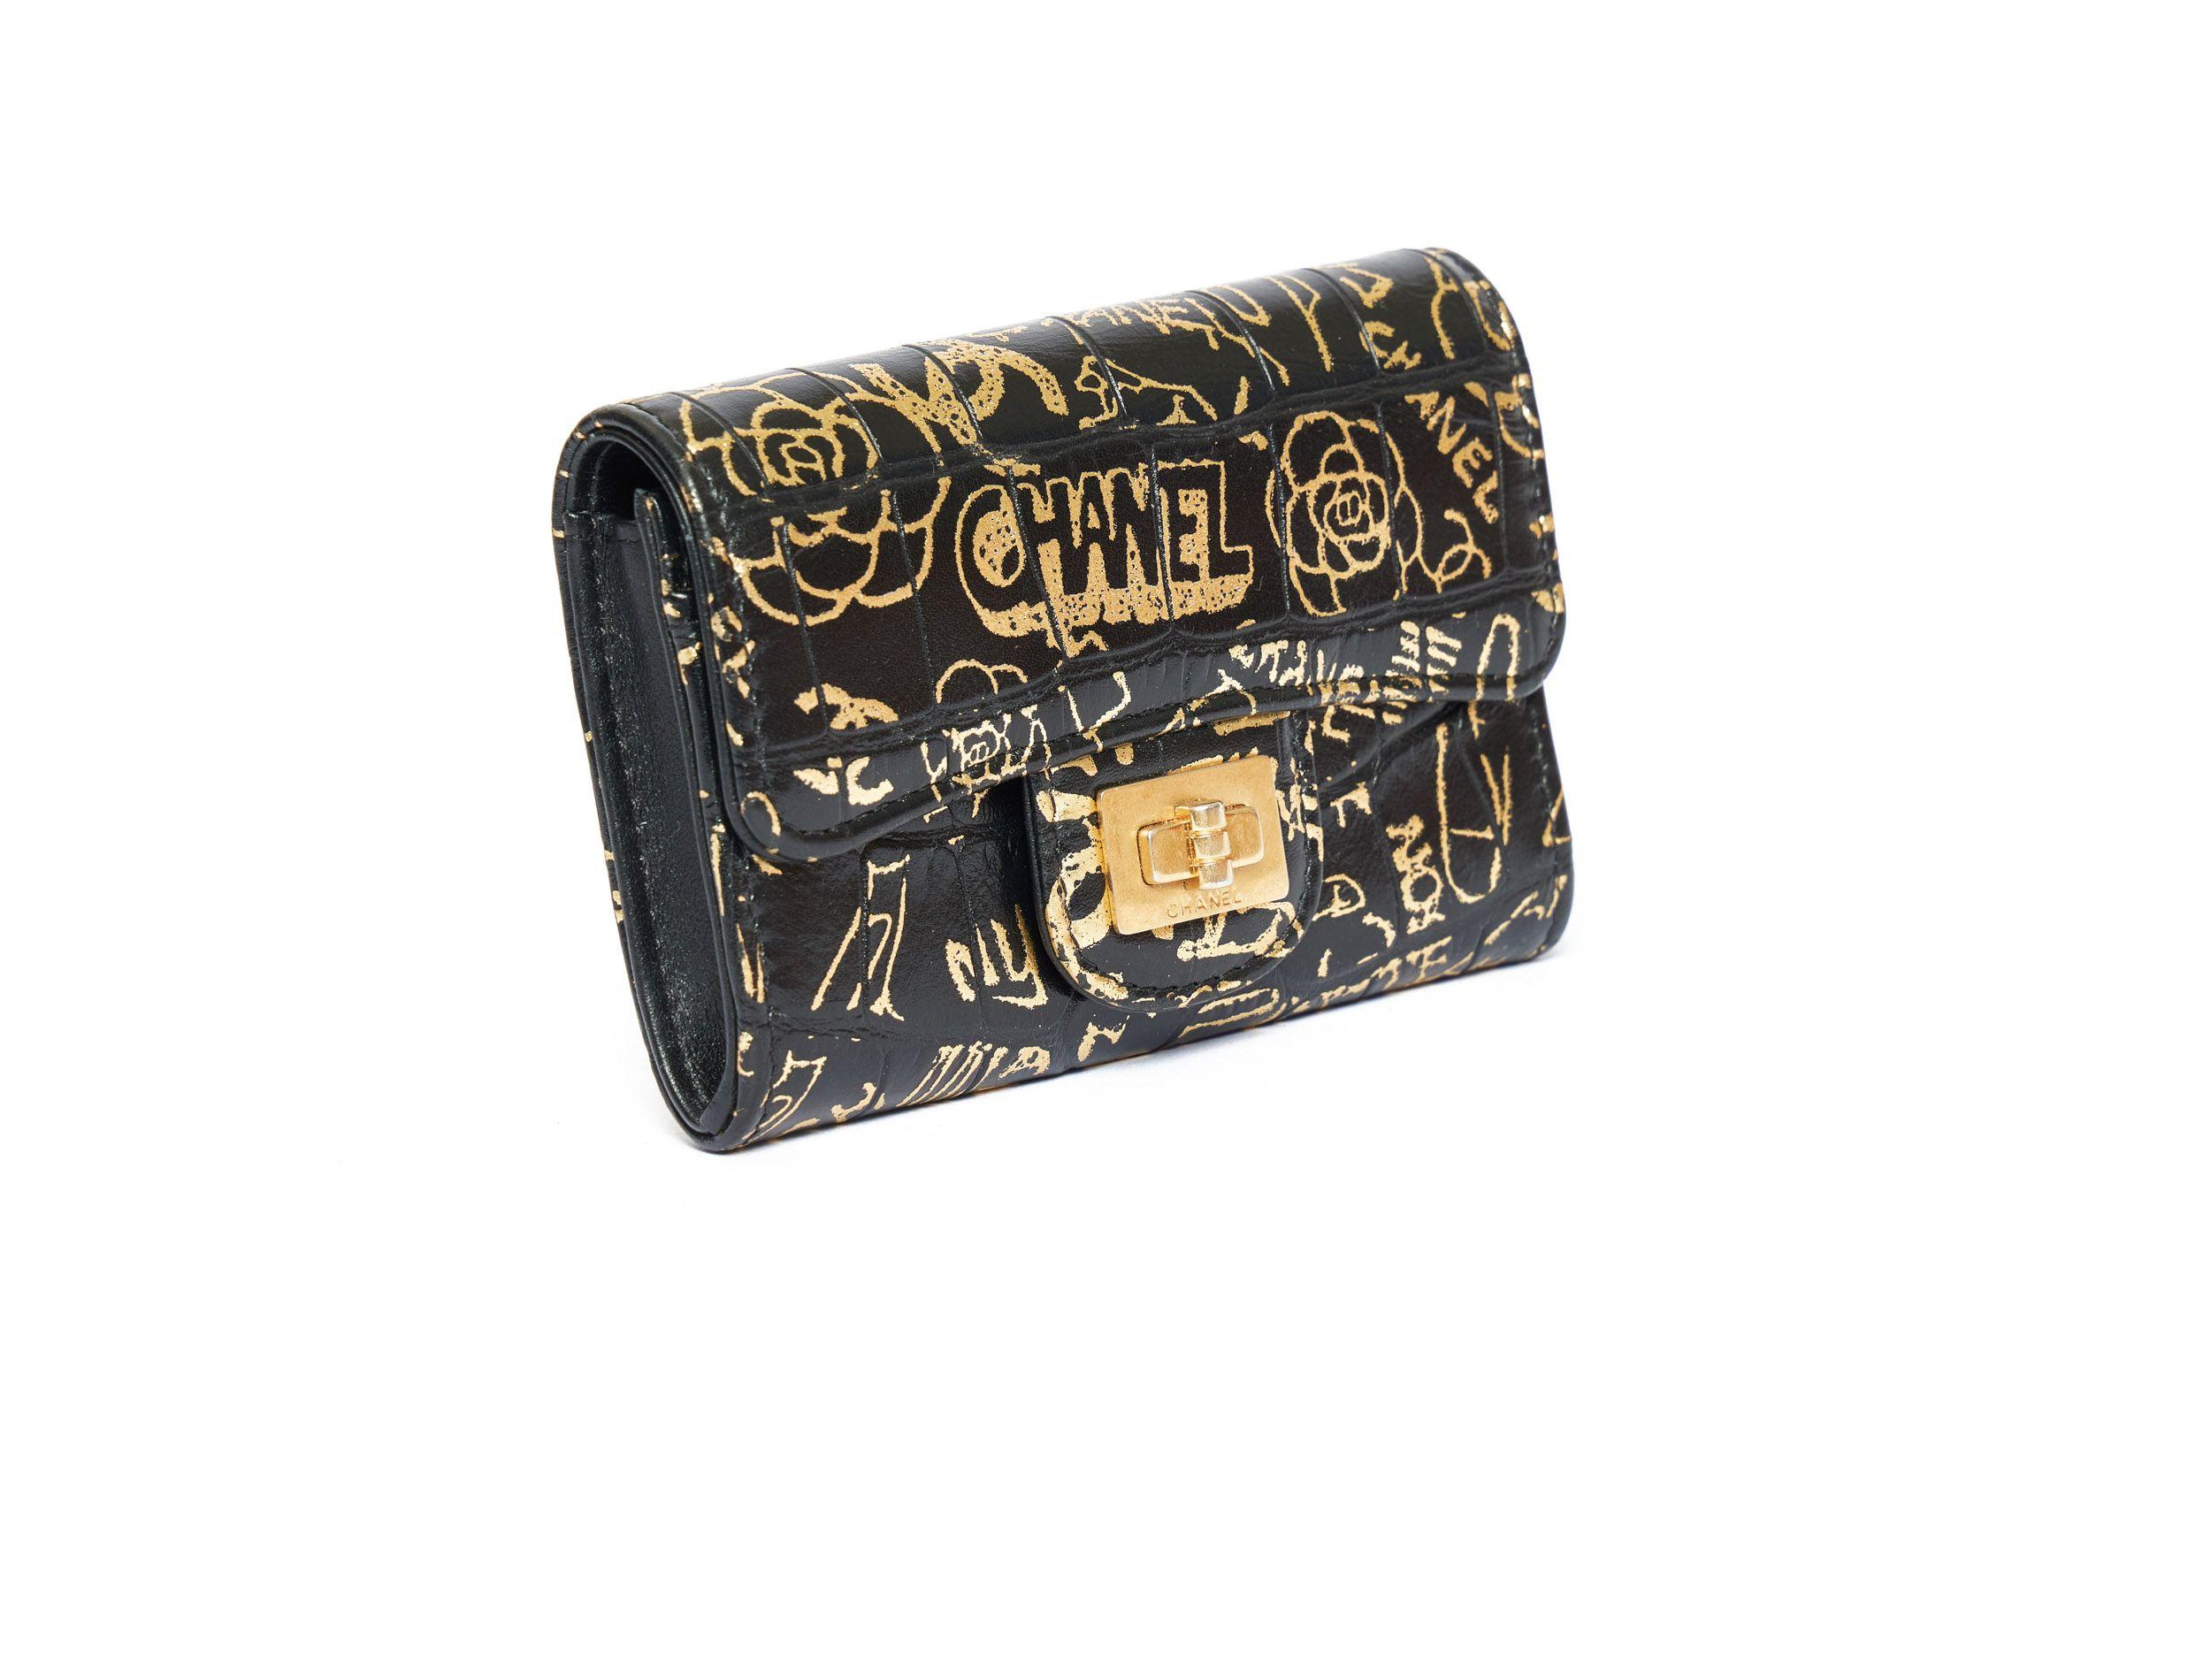 Chanel Limited Edition credit card case in black lambskin leather which looks like crocodile. The case is painted with a graffiti which shows flowers and Chanel written on it in different ways. The snap looks like a small turn lock with Chanel